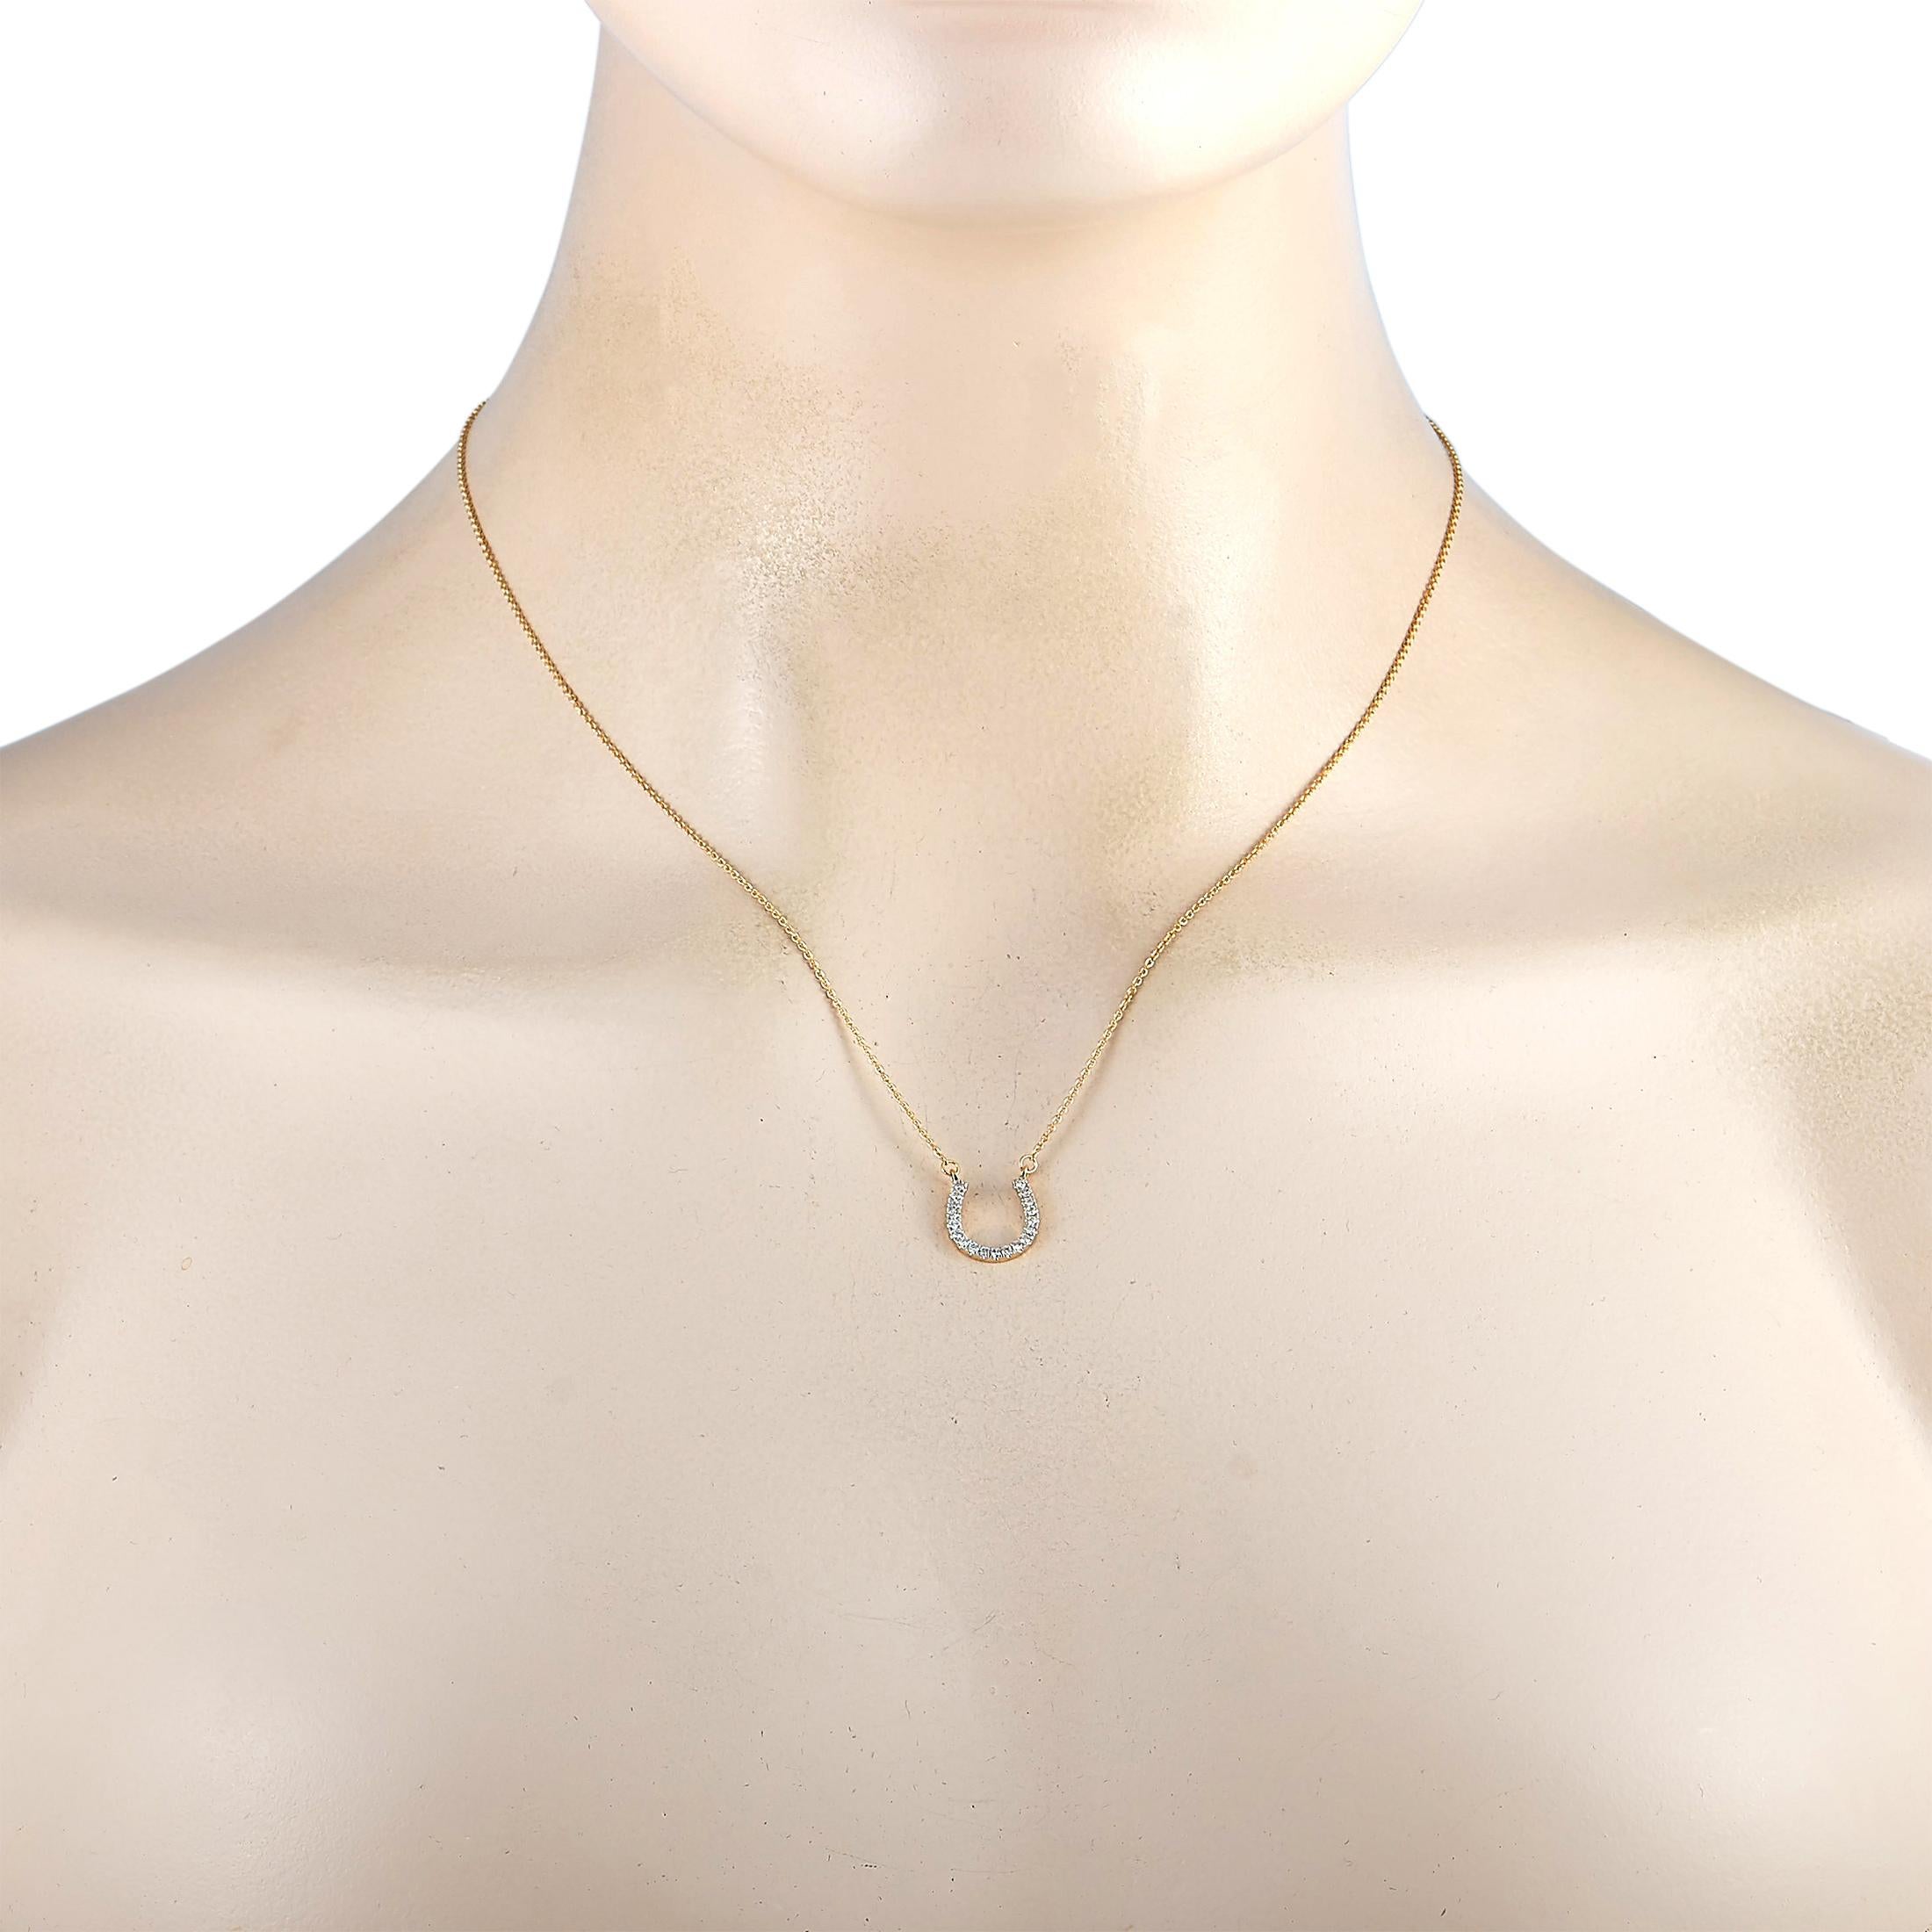 This LB Exclusive necklace is made of 14K yellow gold and embellished with diamonds that amount to 0.20 carats. The necklace weighs 2 grams and is presented with a 16” chain and a horseshoe pendant that measures 0.50” in length and 0.47” in